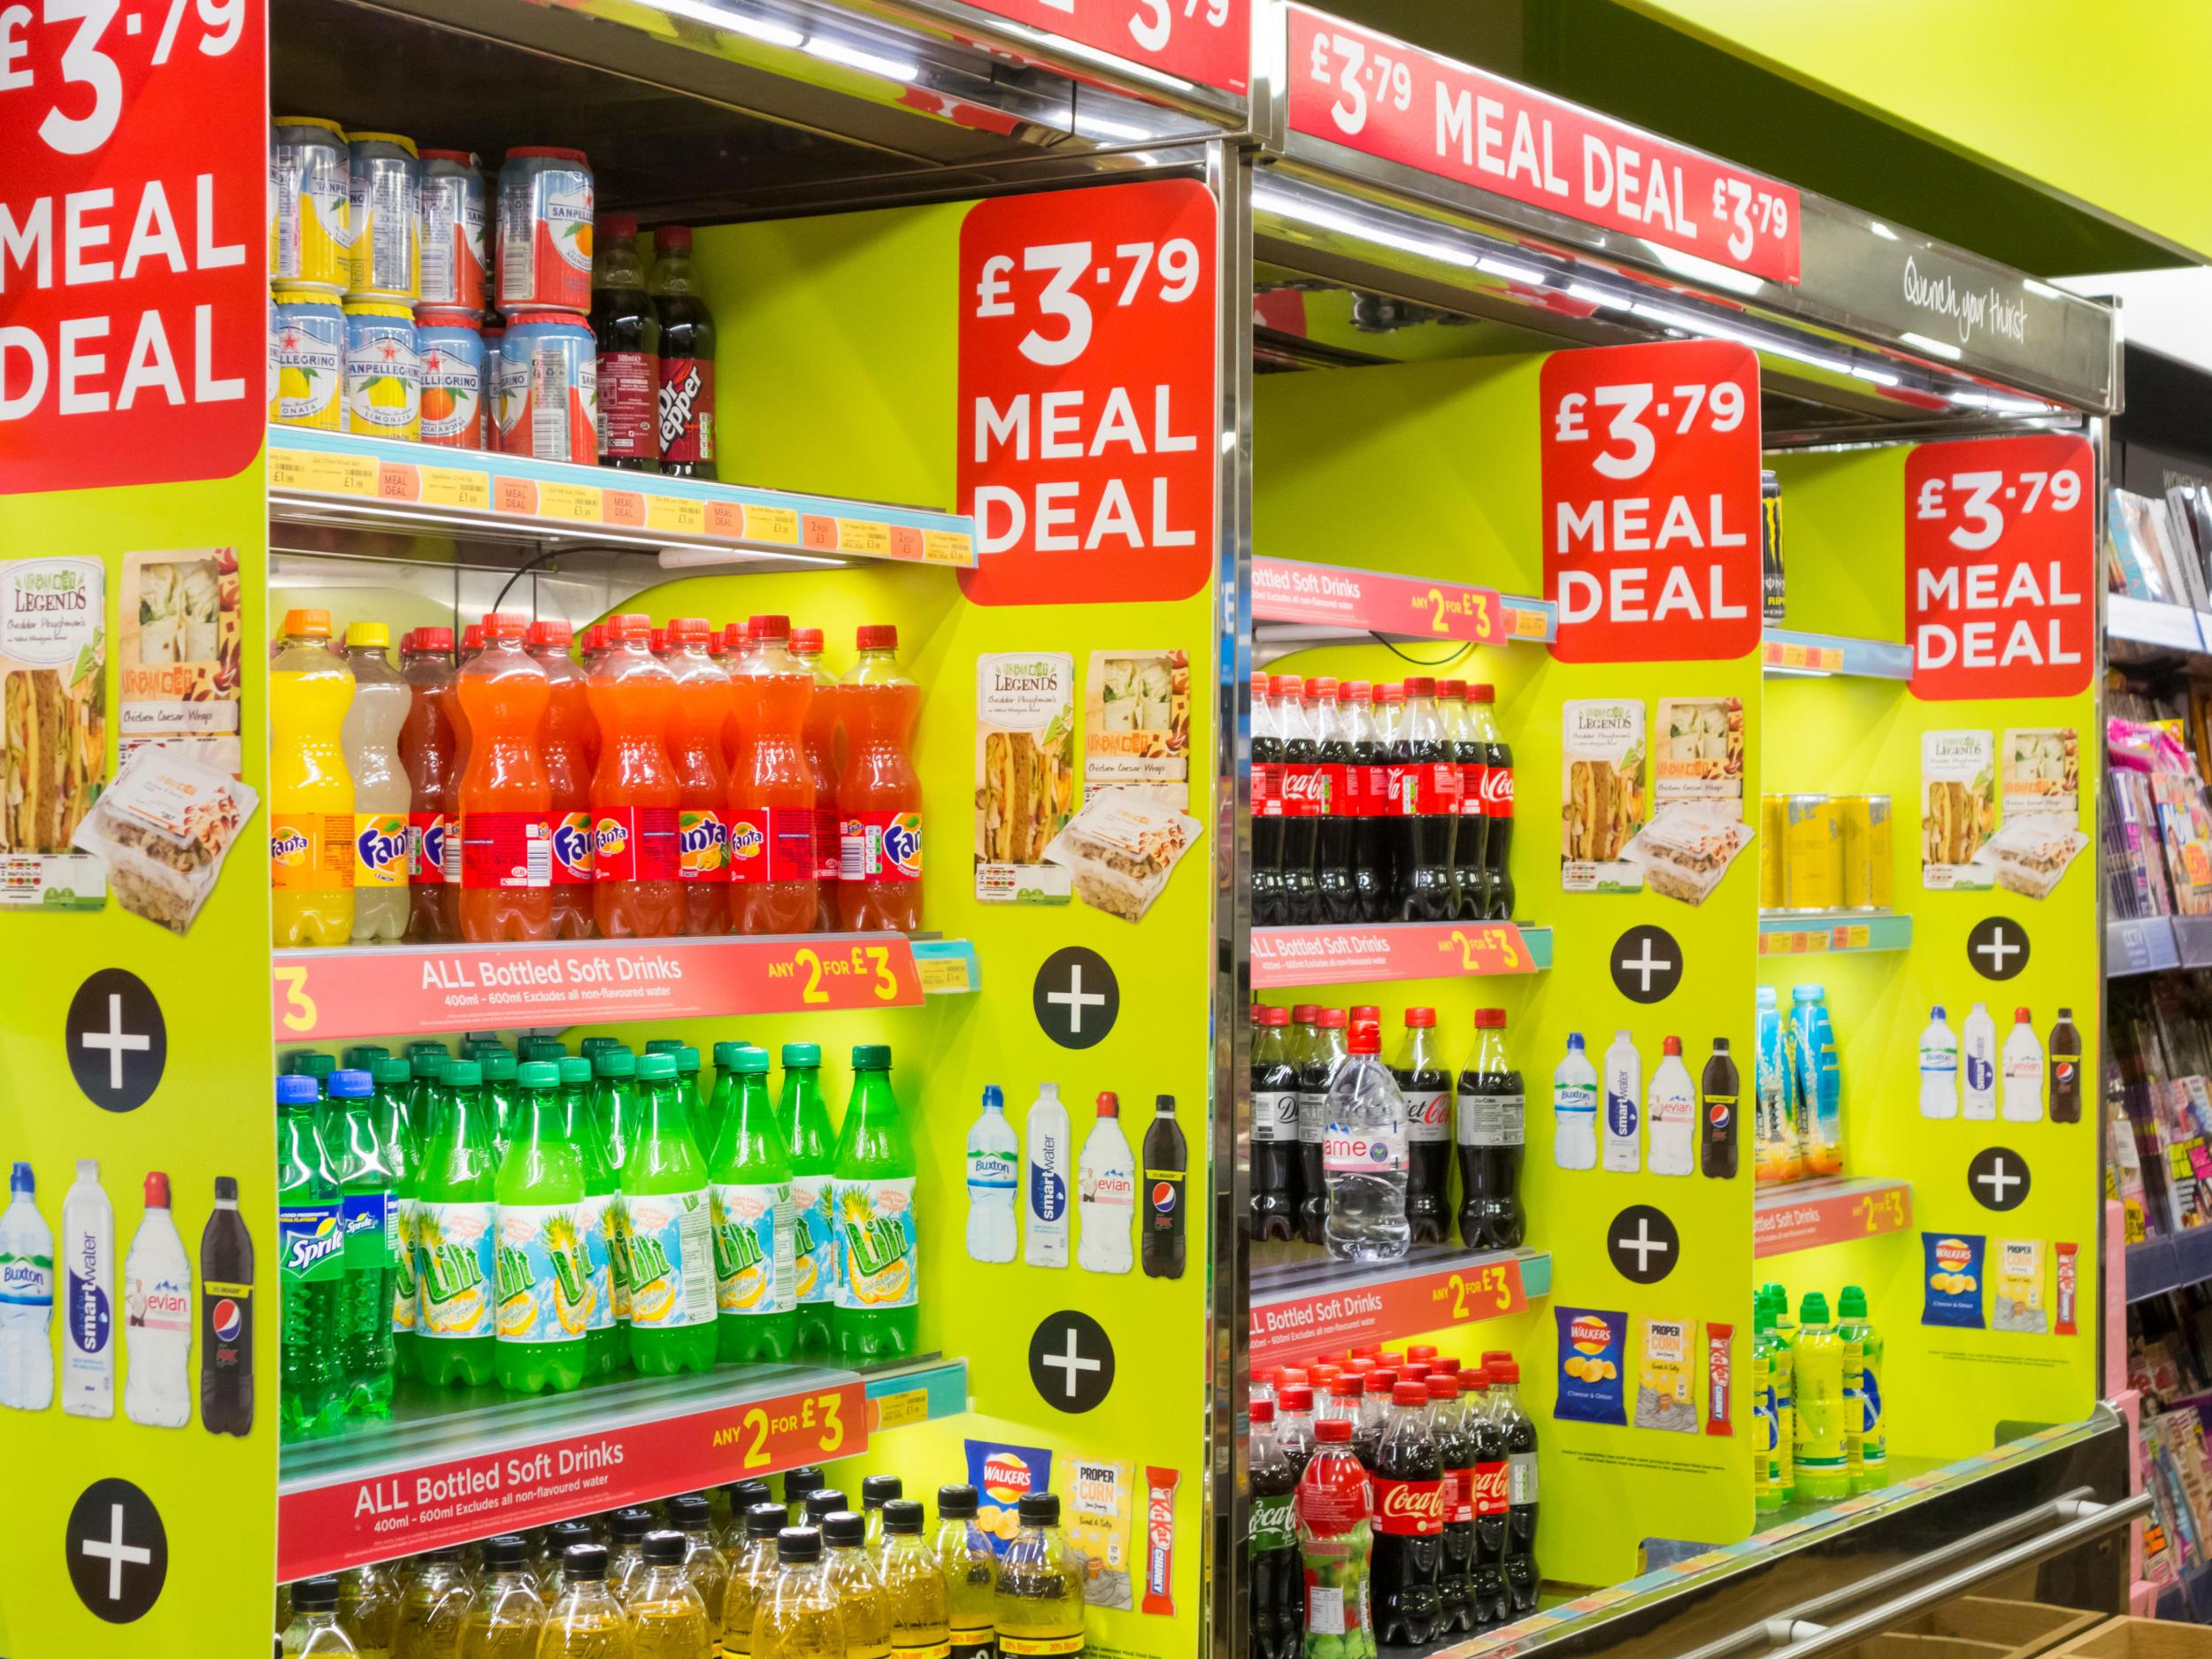 When full-sugar drinks become more expensive, offers may create a perverse incentive to pick them over healthier alternatives